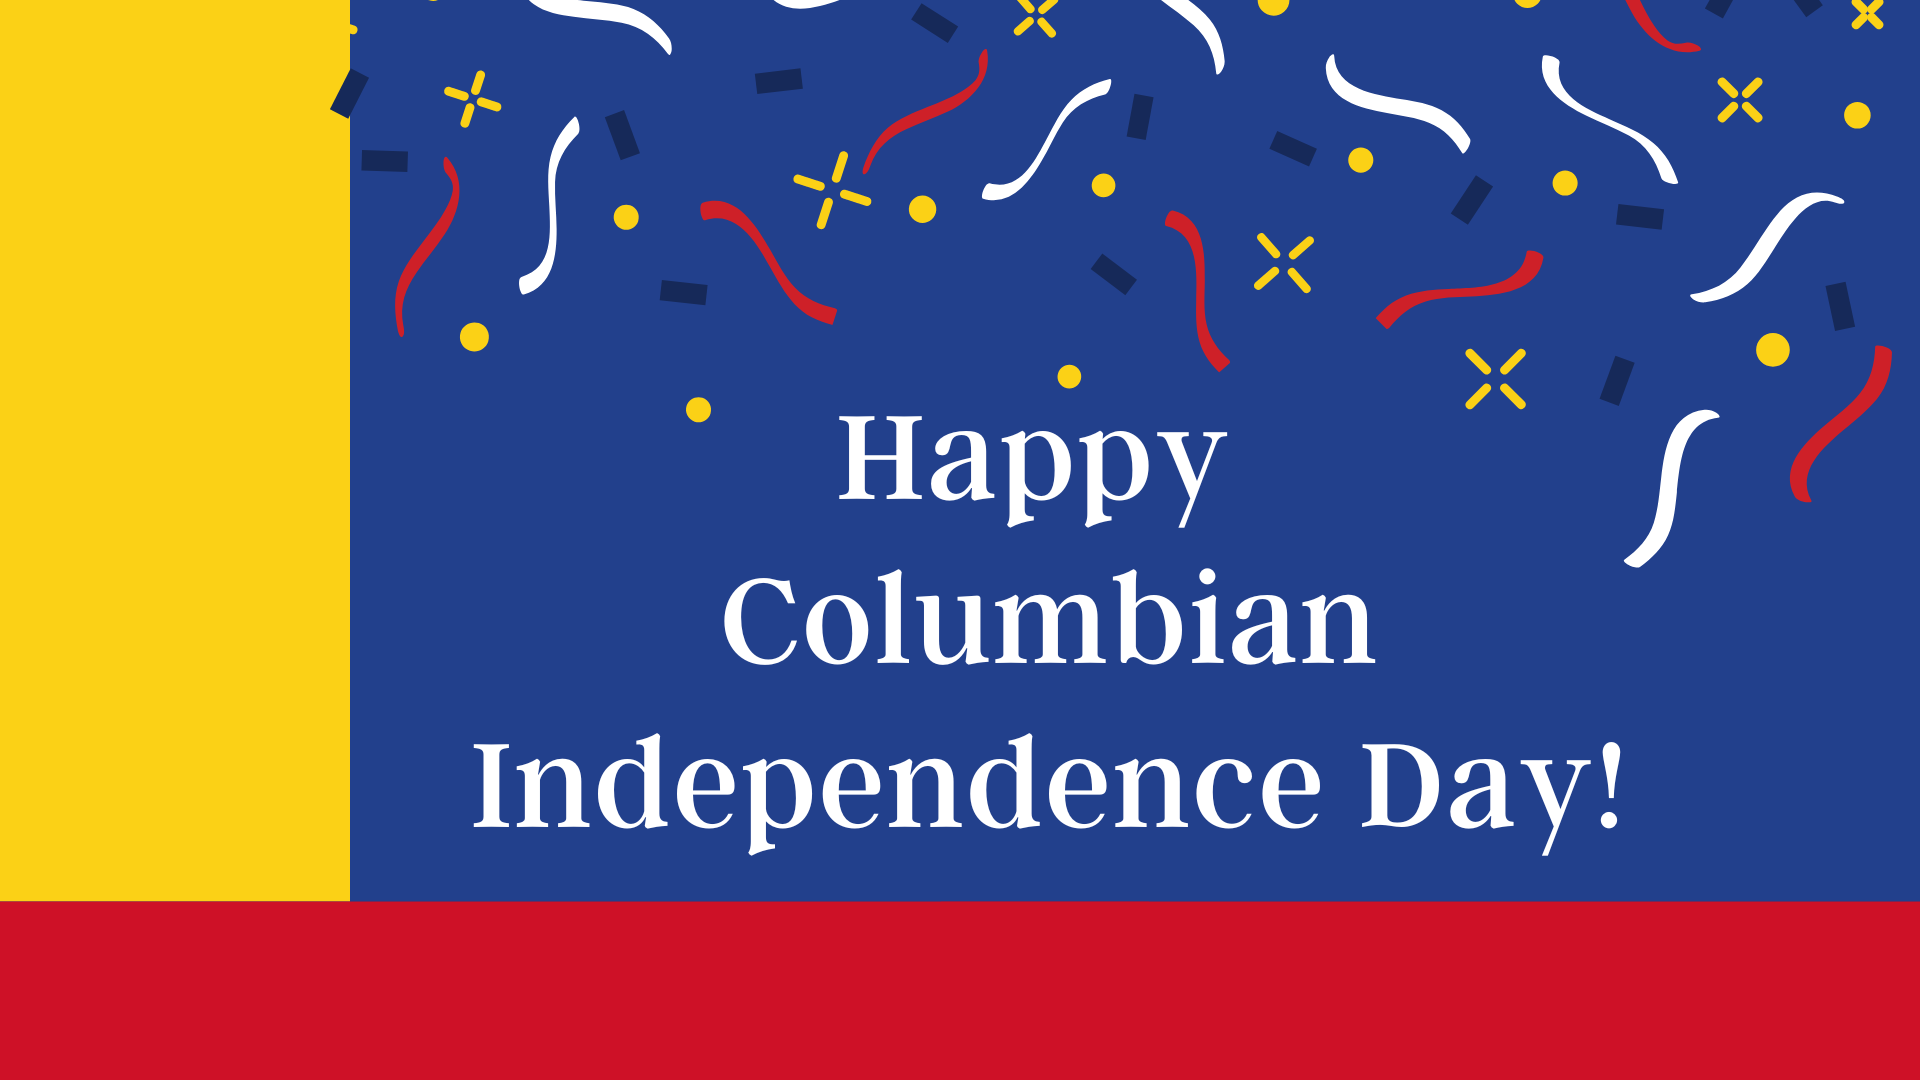 Happy Columbian Independence Day!